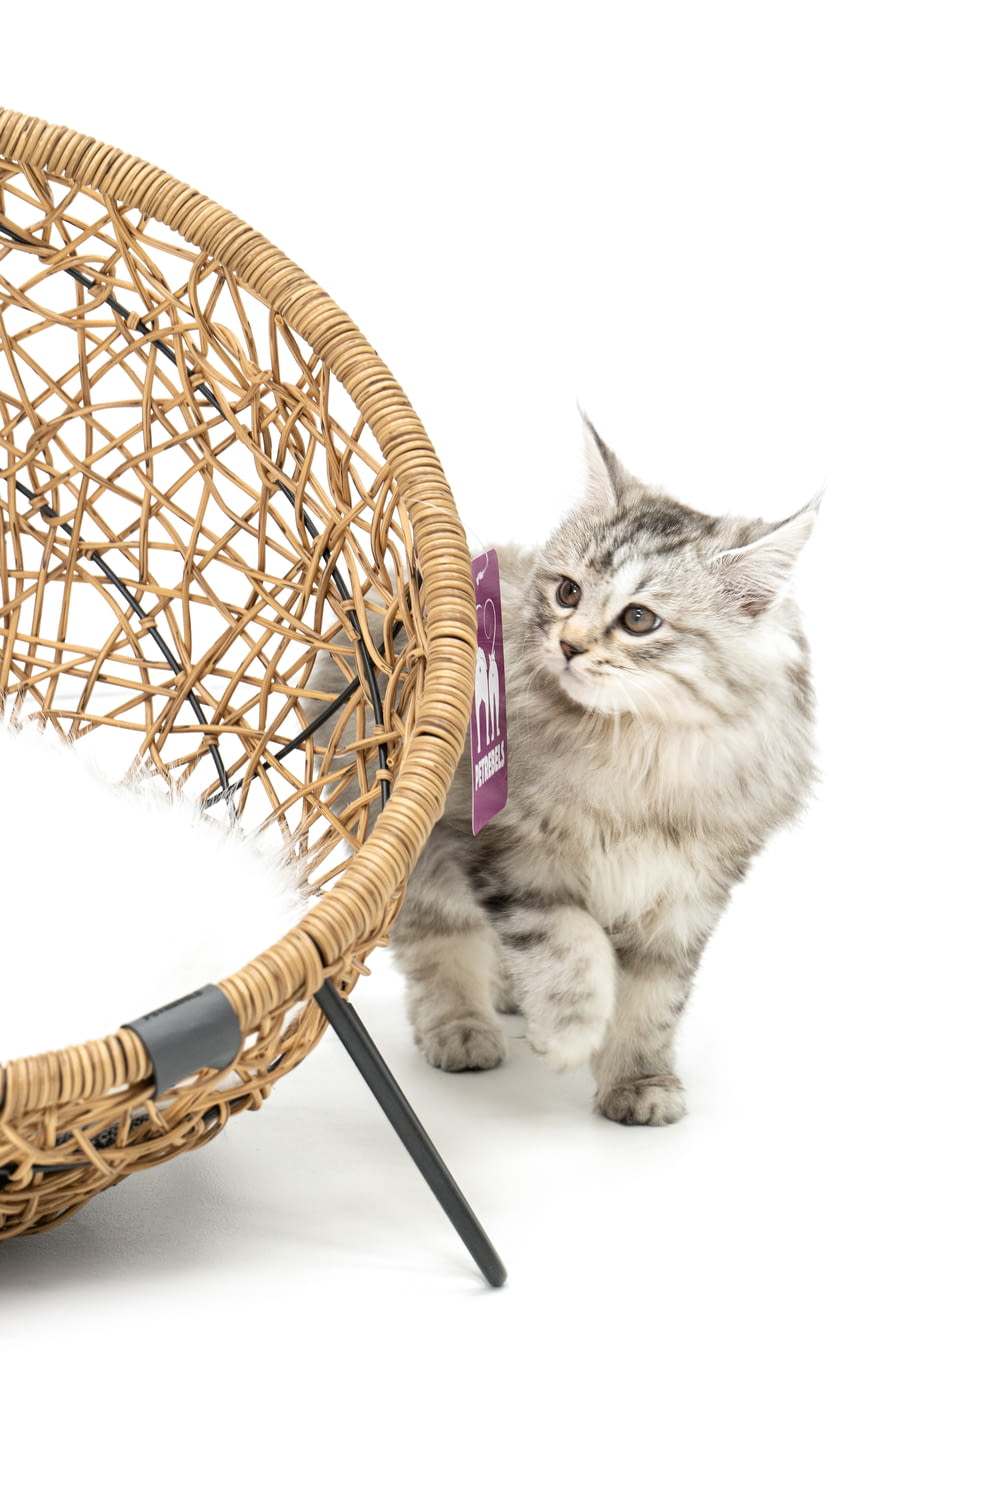 a cat walking next to a wicker chair